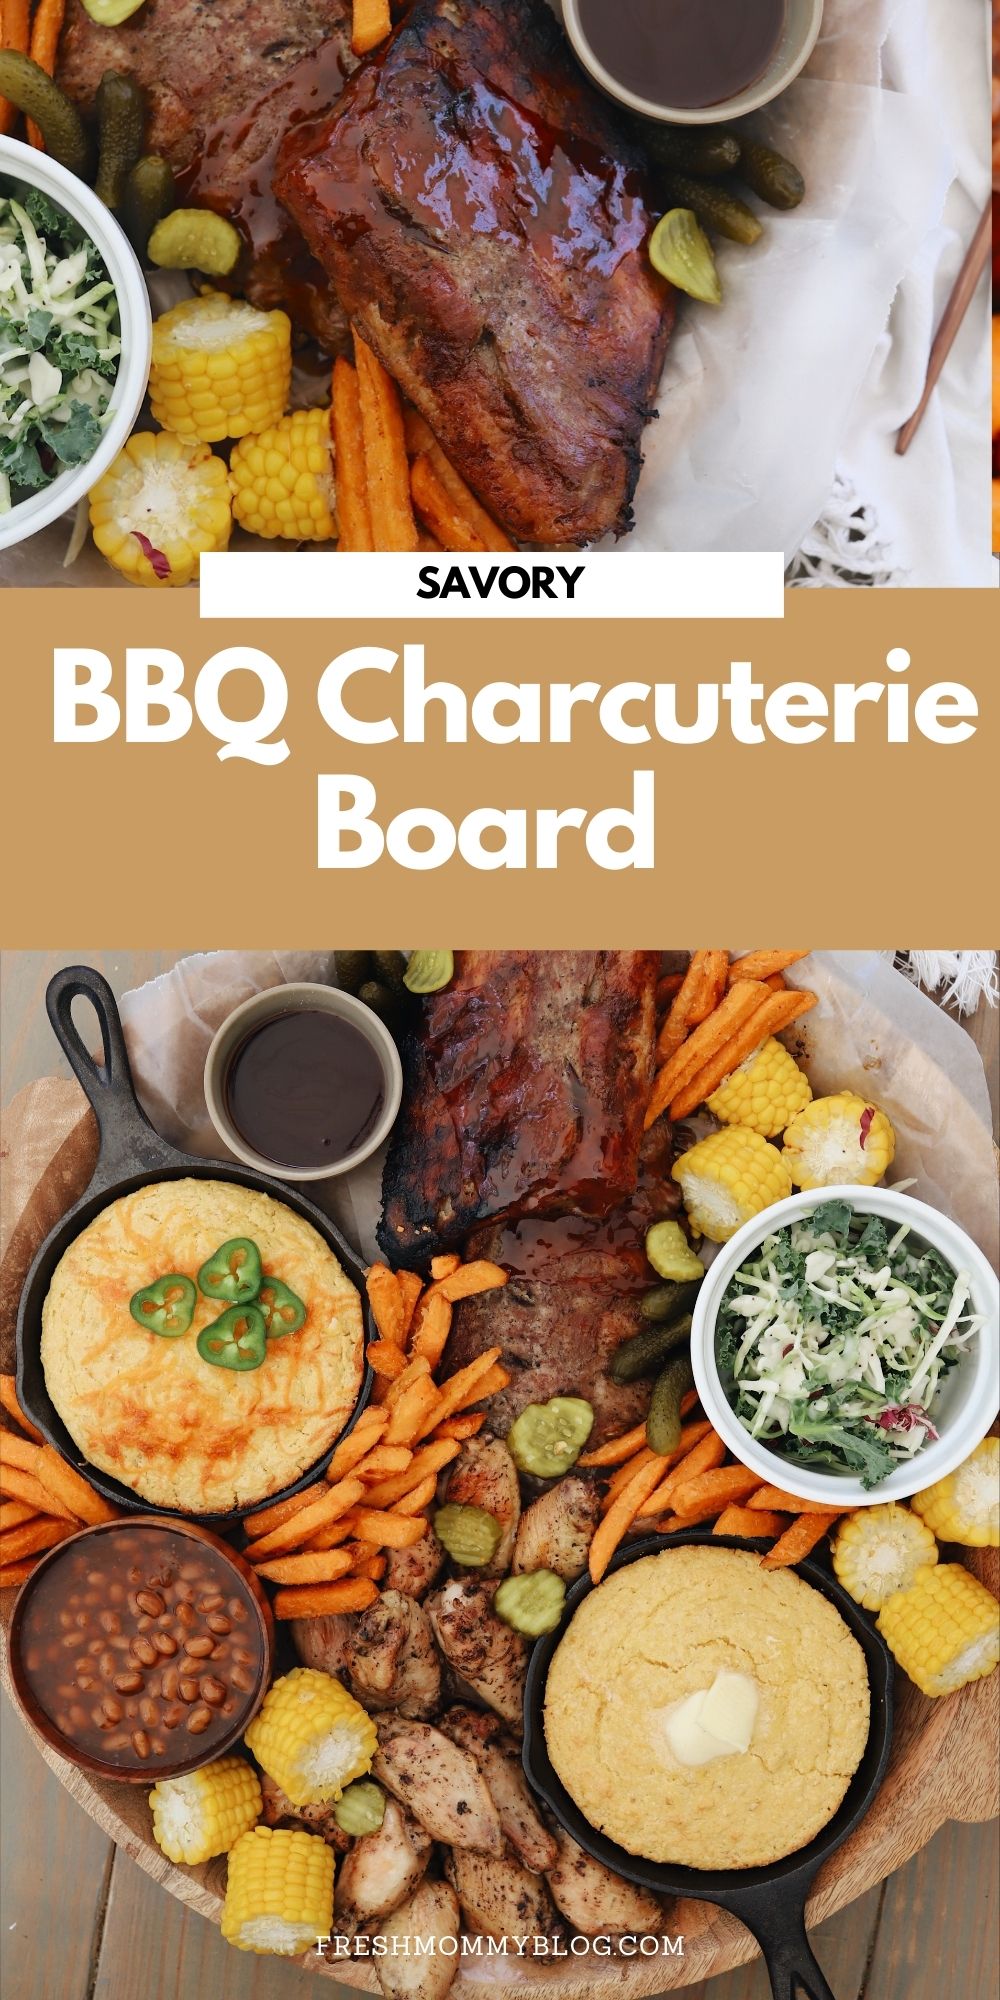 How to Make a Mouthwatering BBQ Charcuterie Board With Slow Cooker Ribs